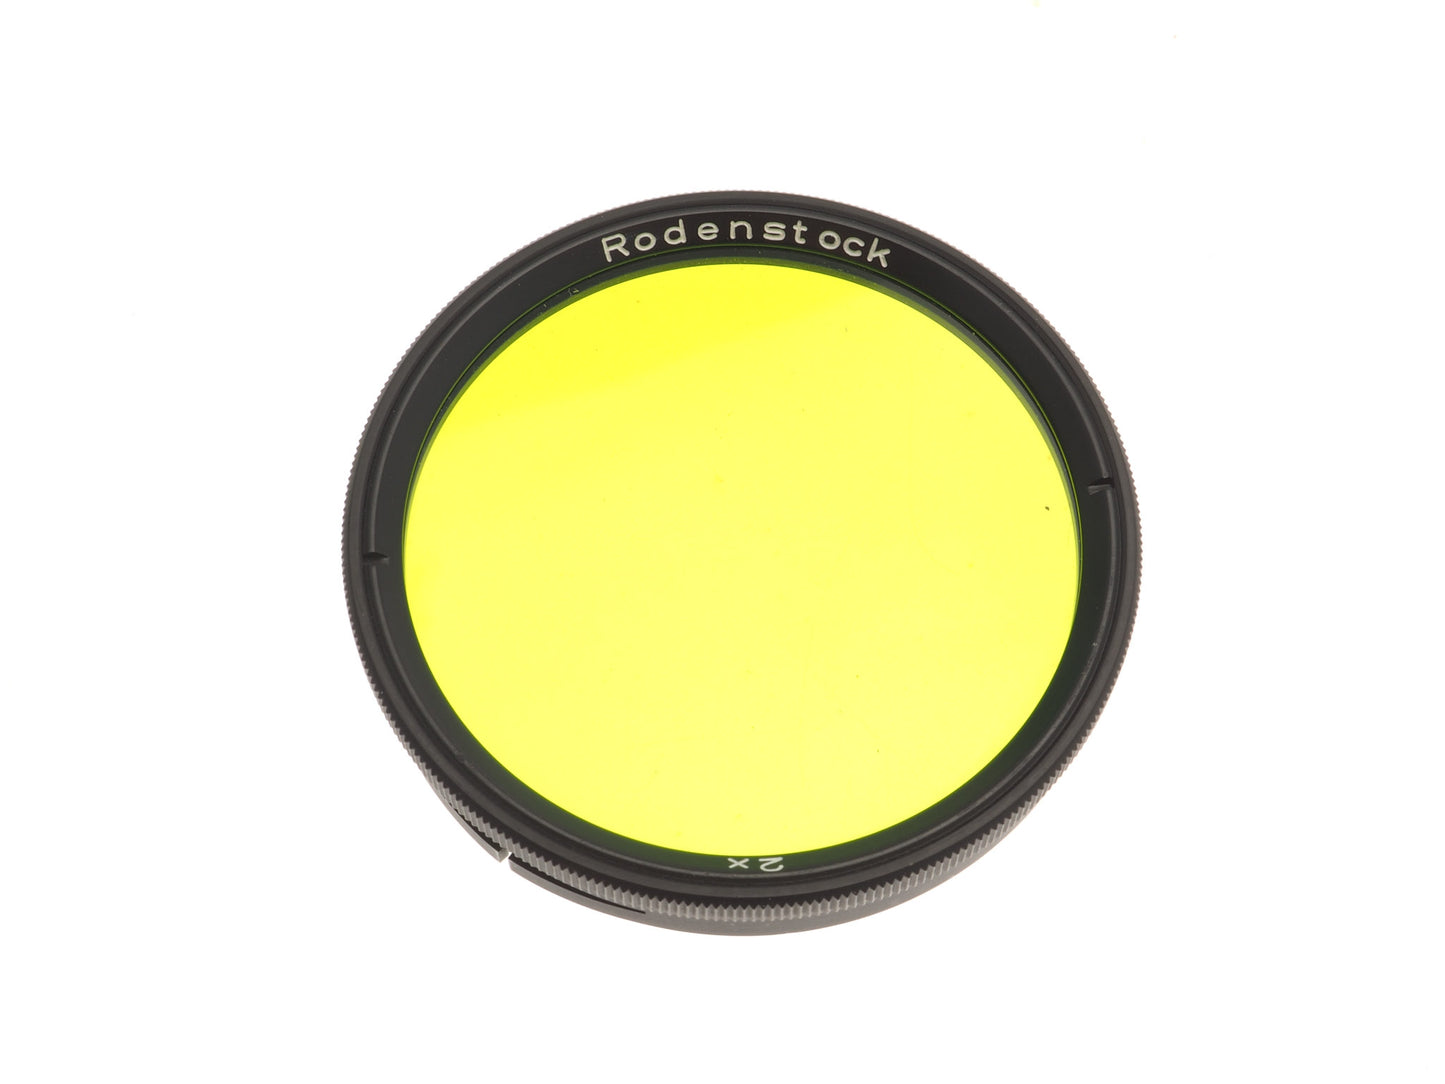 Rodenstock 51mm Push-On Yellow Filter x2